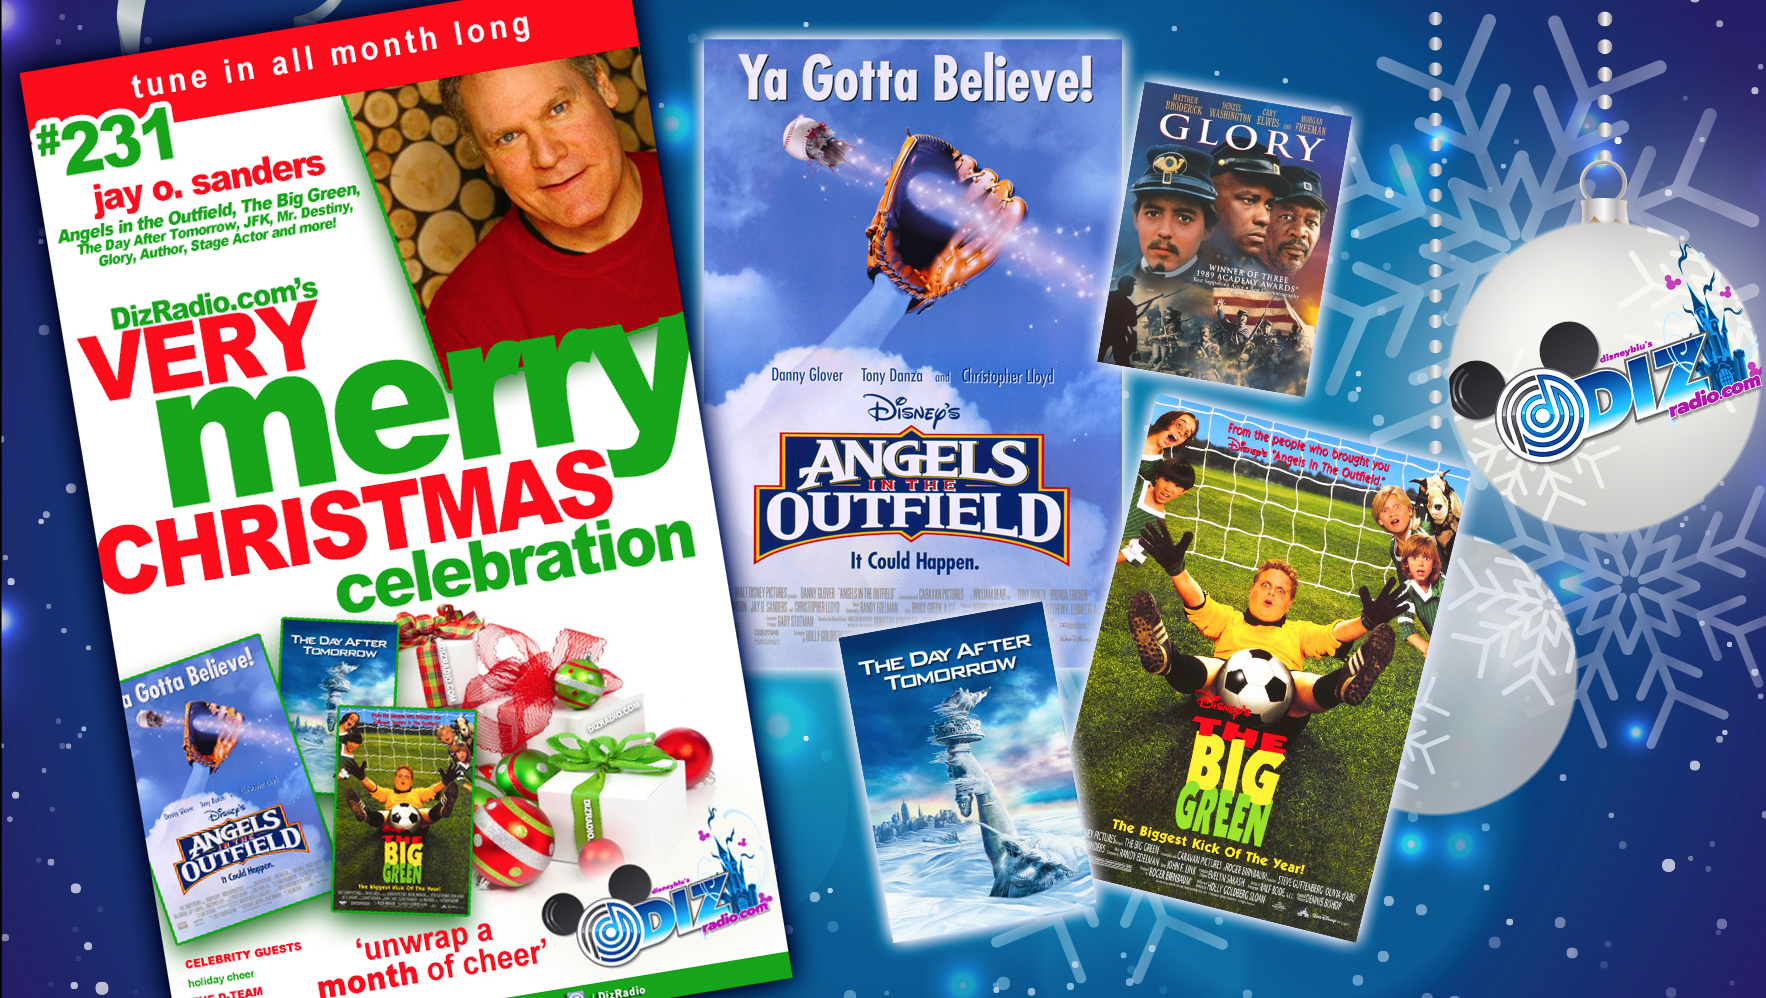 DisneyBlu's DizRadio Disney on Demand Show #231 w/ Guest JAY O. SANDERS (Angels in the Outfield, The Big Green, Mr. Destiny, Day After Tomorrow, JFK, Glory, Author and more)